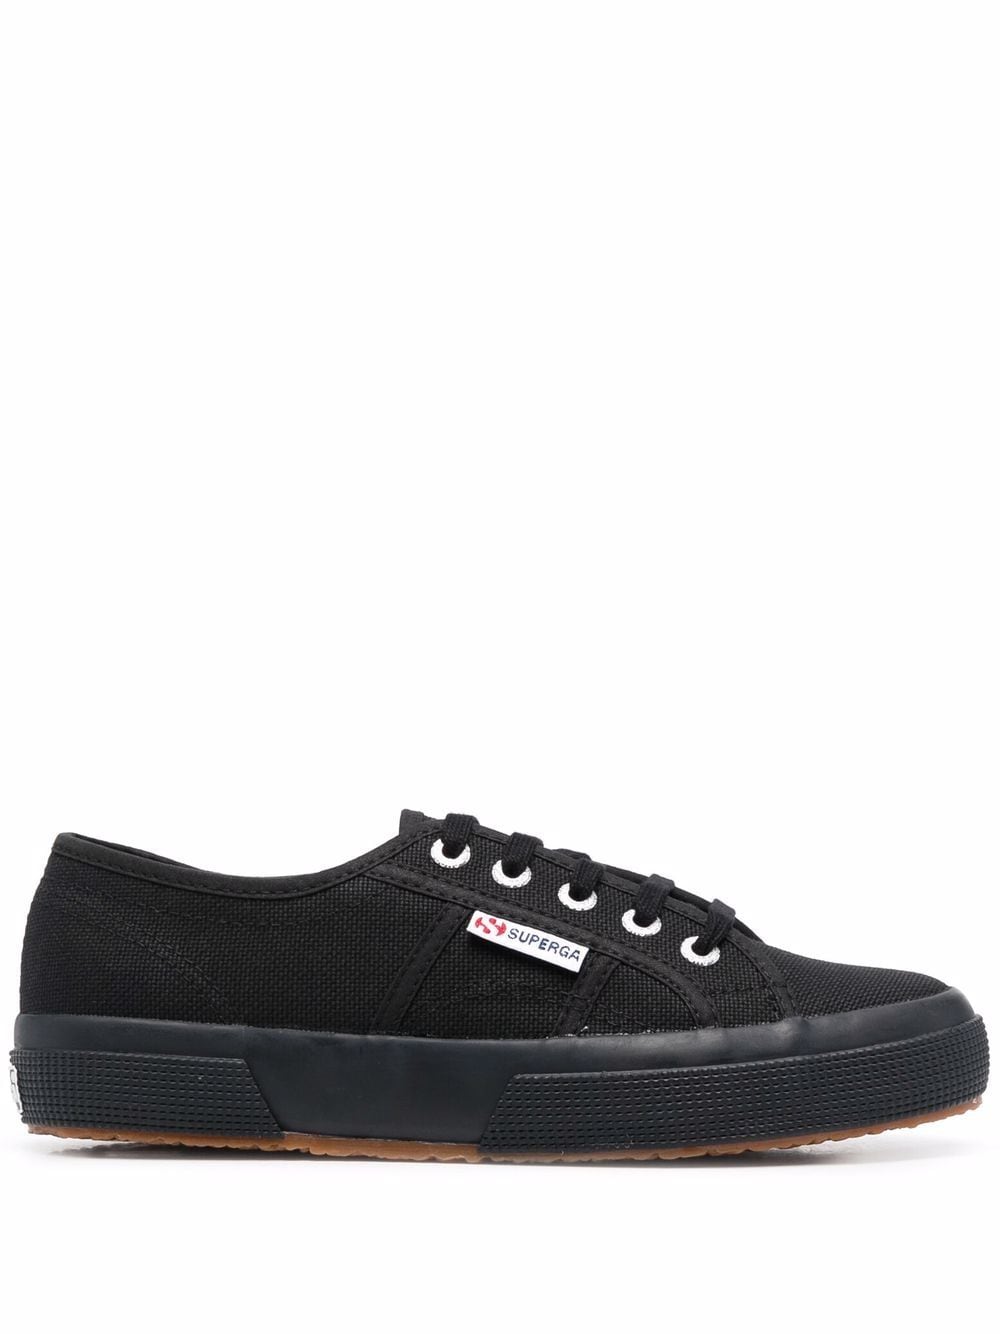 Image 1 of Superga low-top cotton sneakers